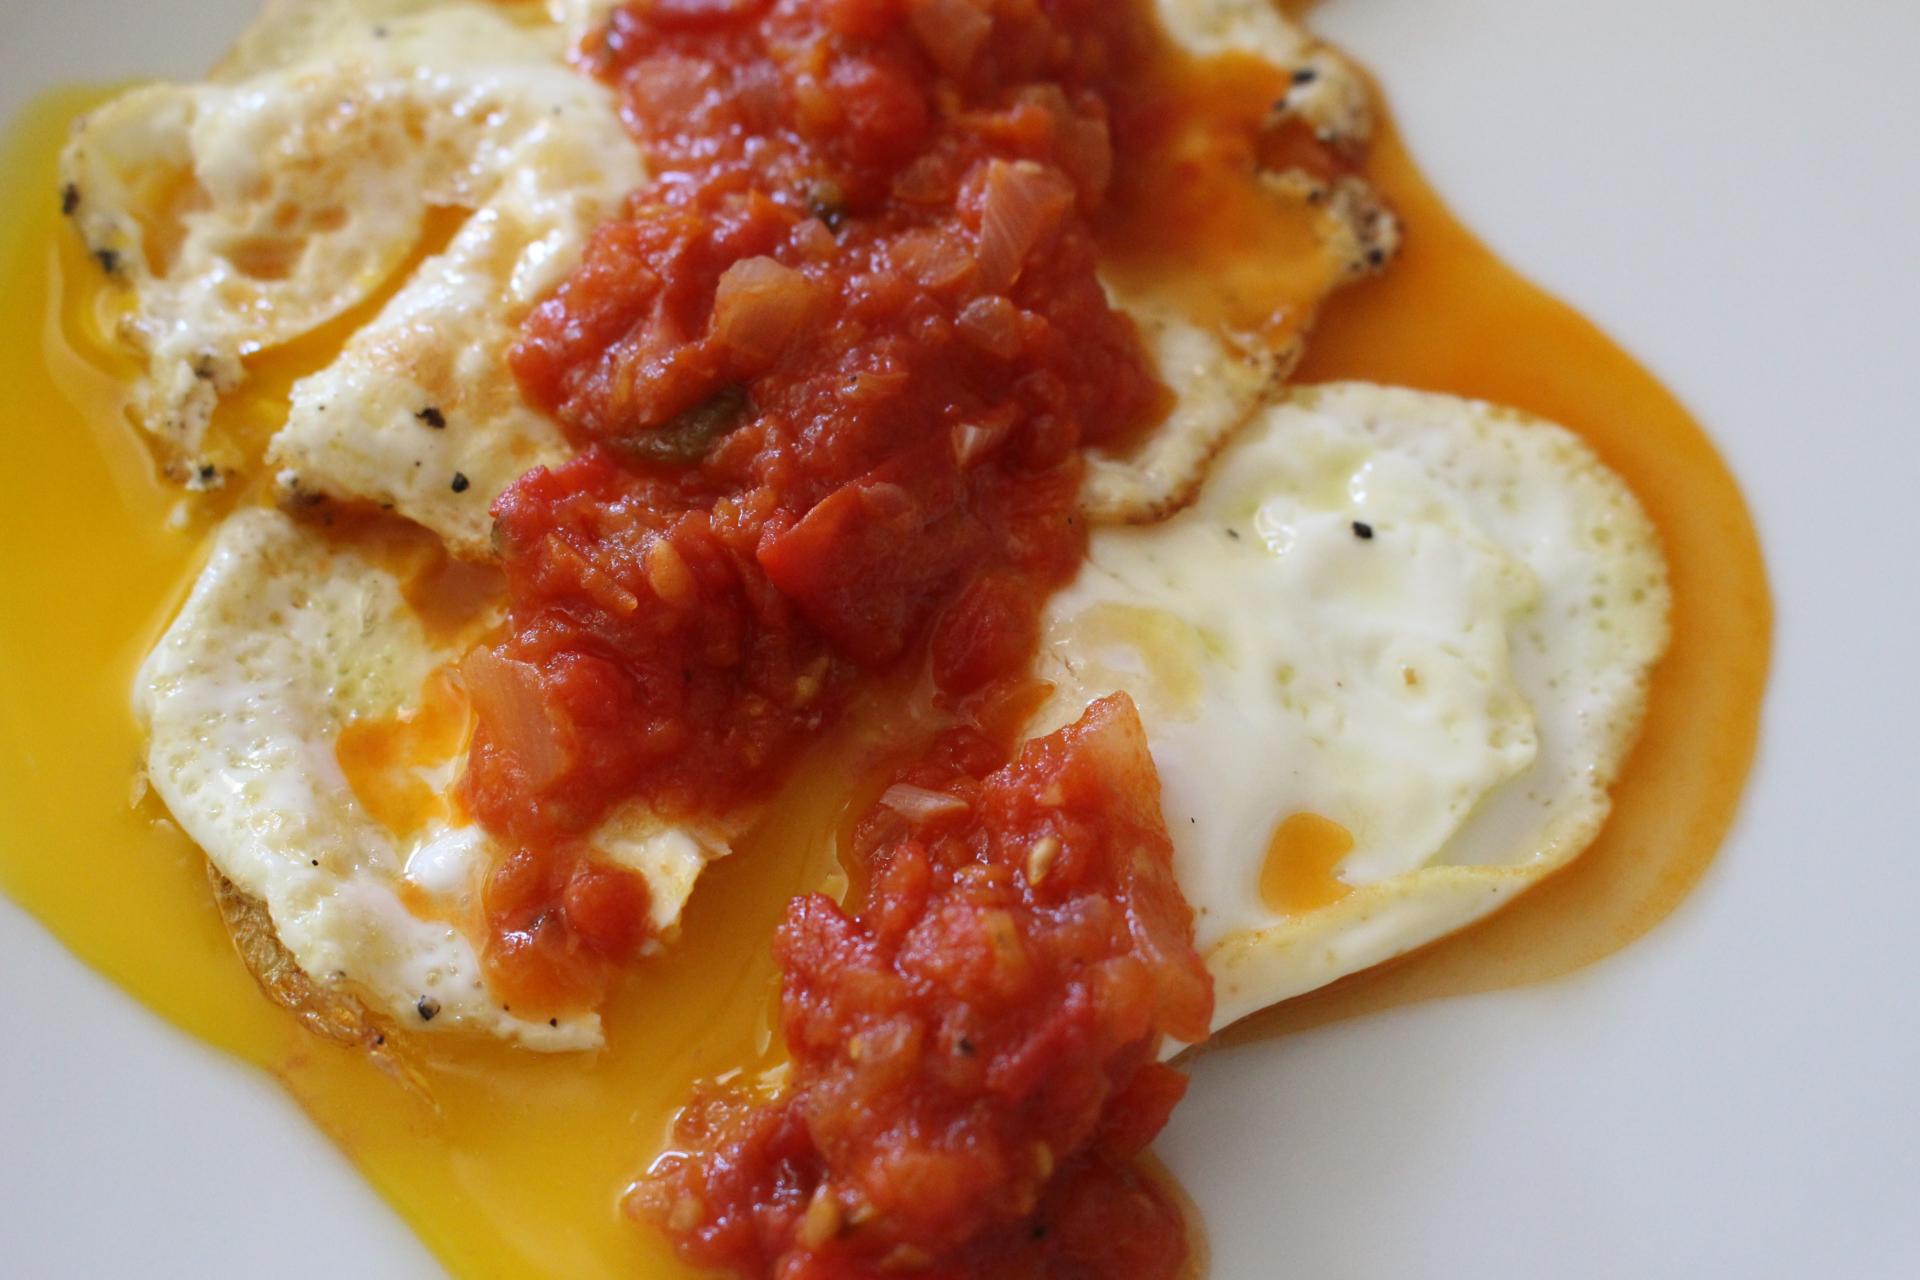 BREAKFAST: Over Easy Eggs with Spicy Tomato Sauce